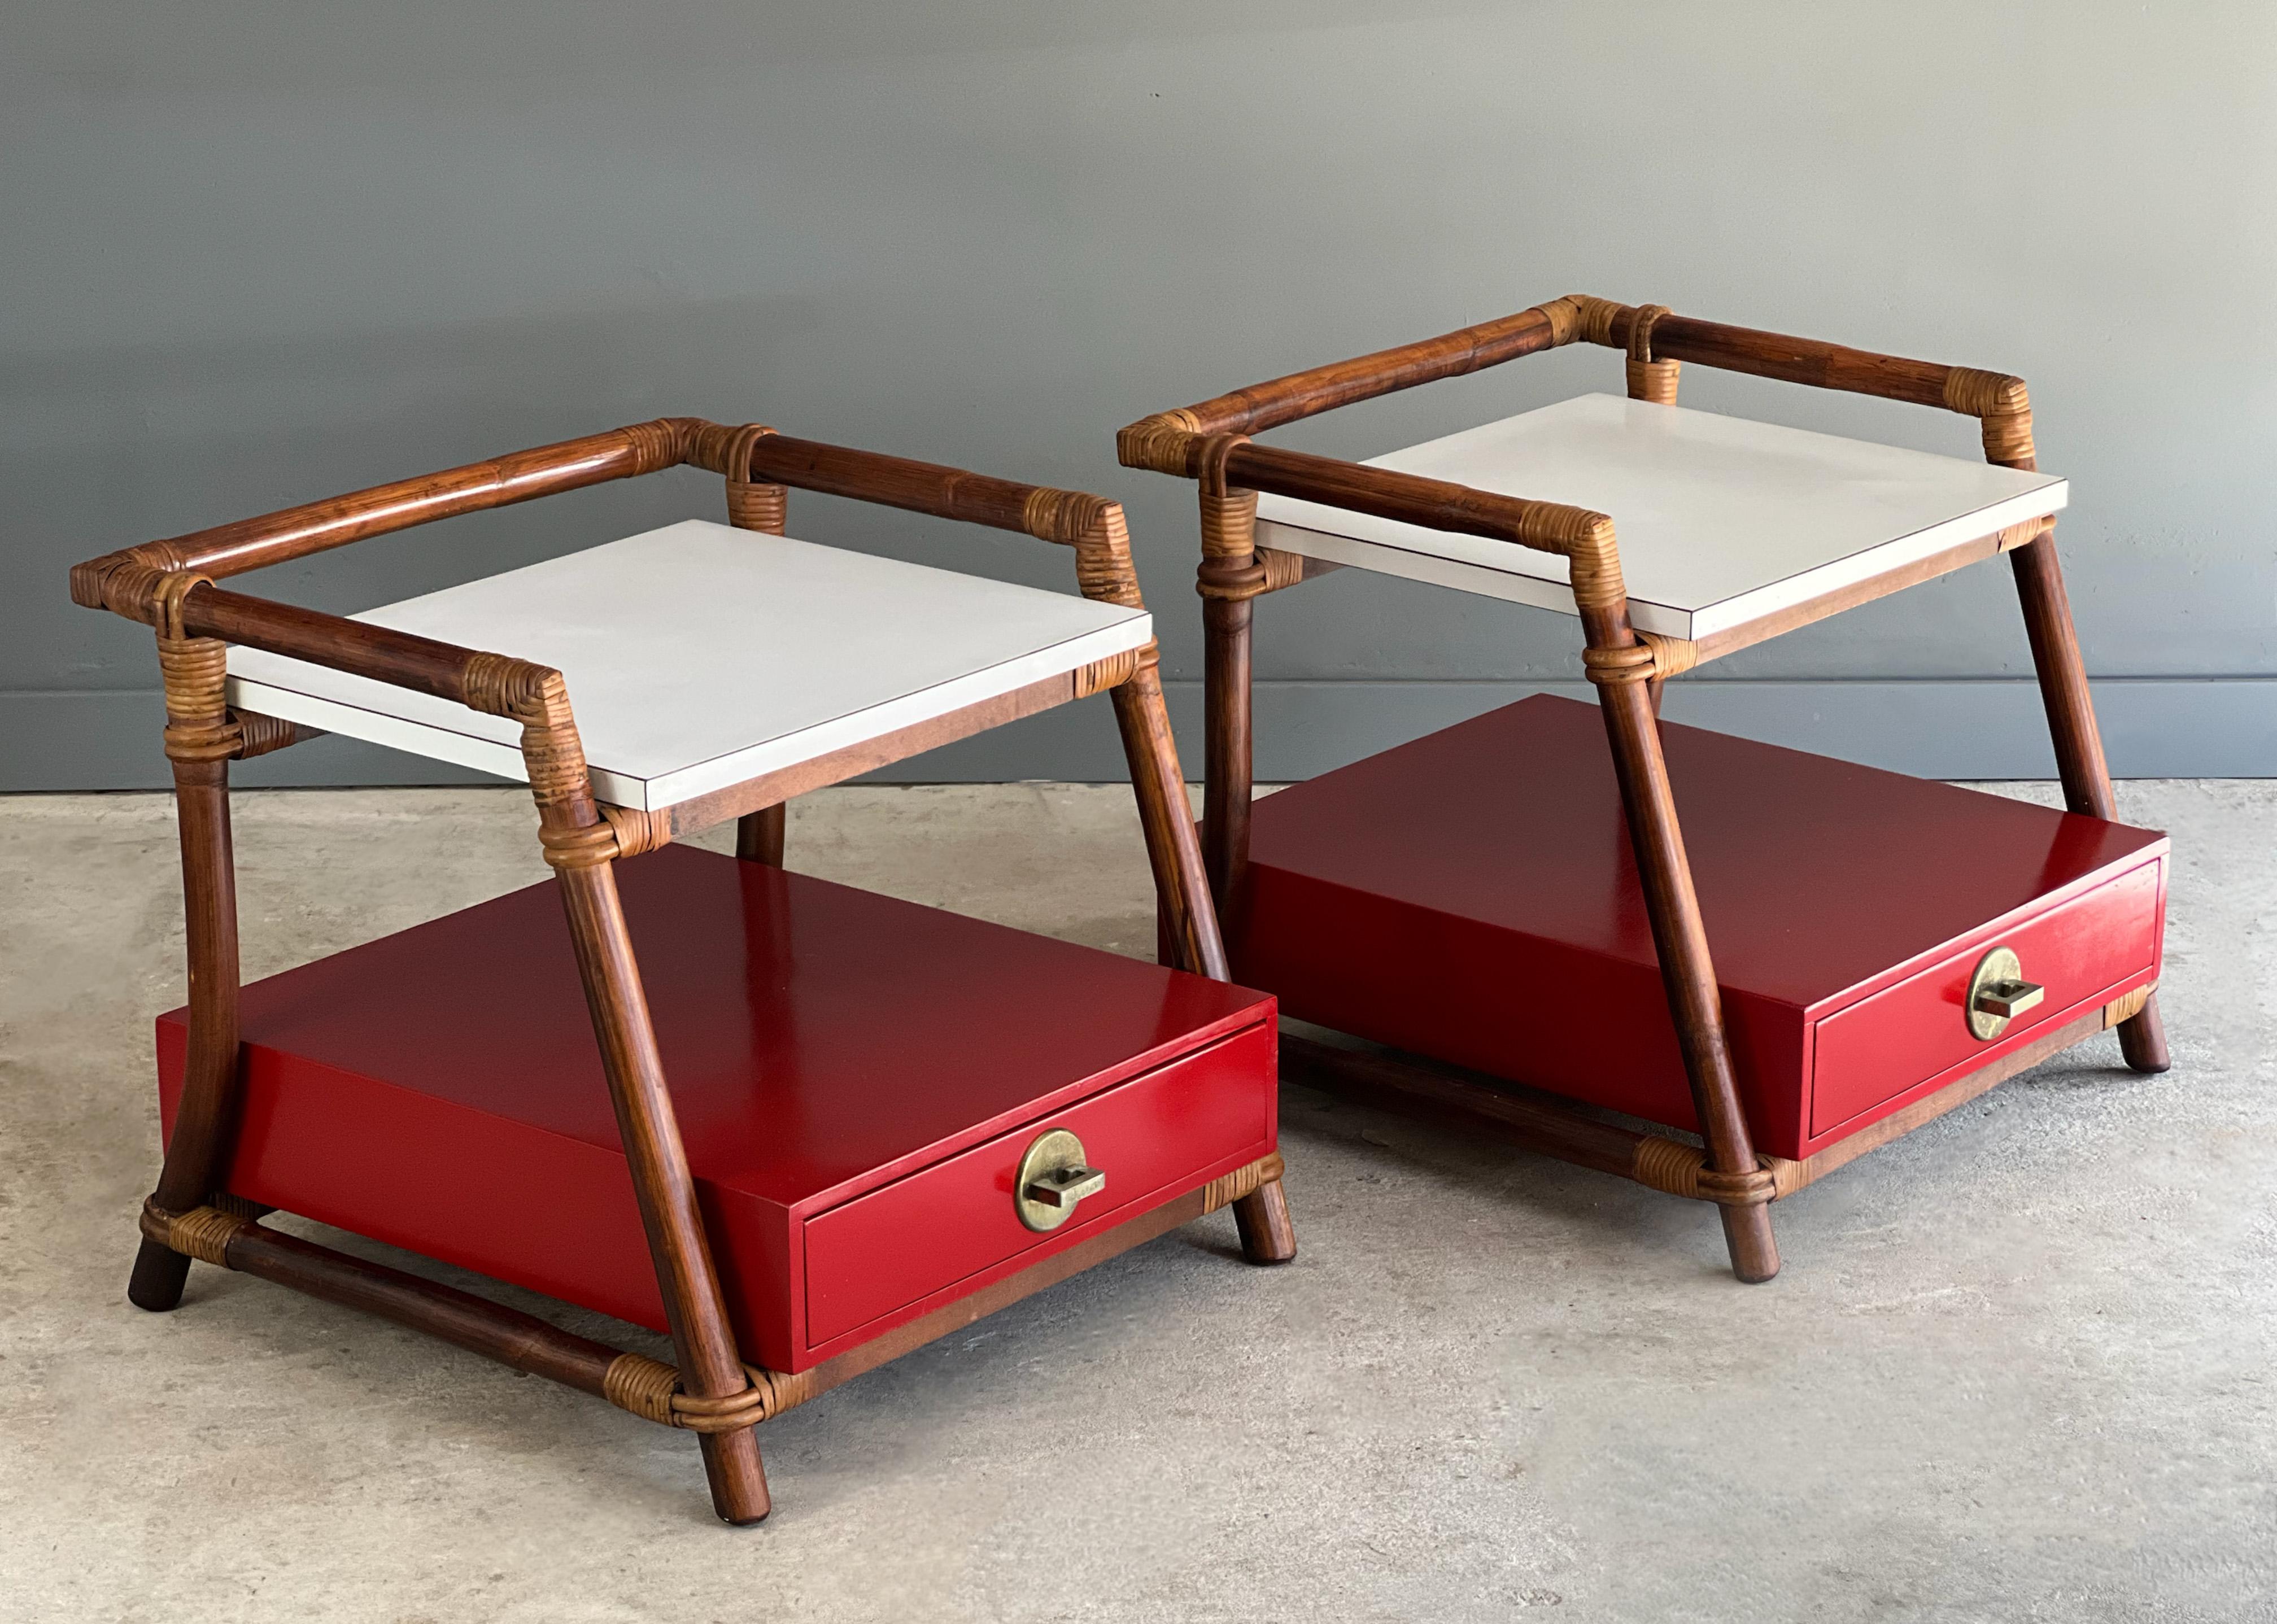 Pair of not often seen side tables or nightstands by Ficks Reed. Likely designed by John Wisner, these are a perfect compliment of color to any space. Each table features a “regal red” drawer box with brass pull and a white laminate top shelf.